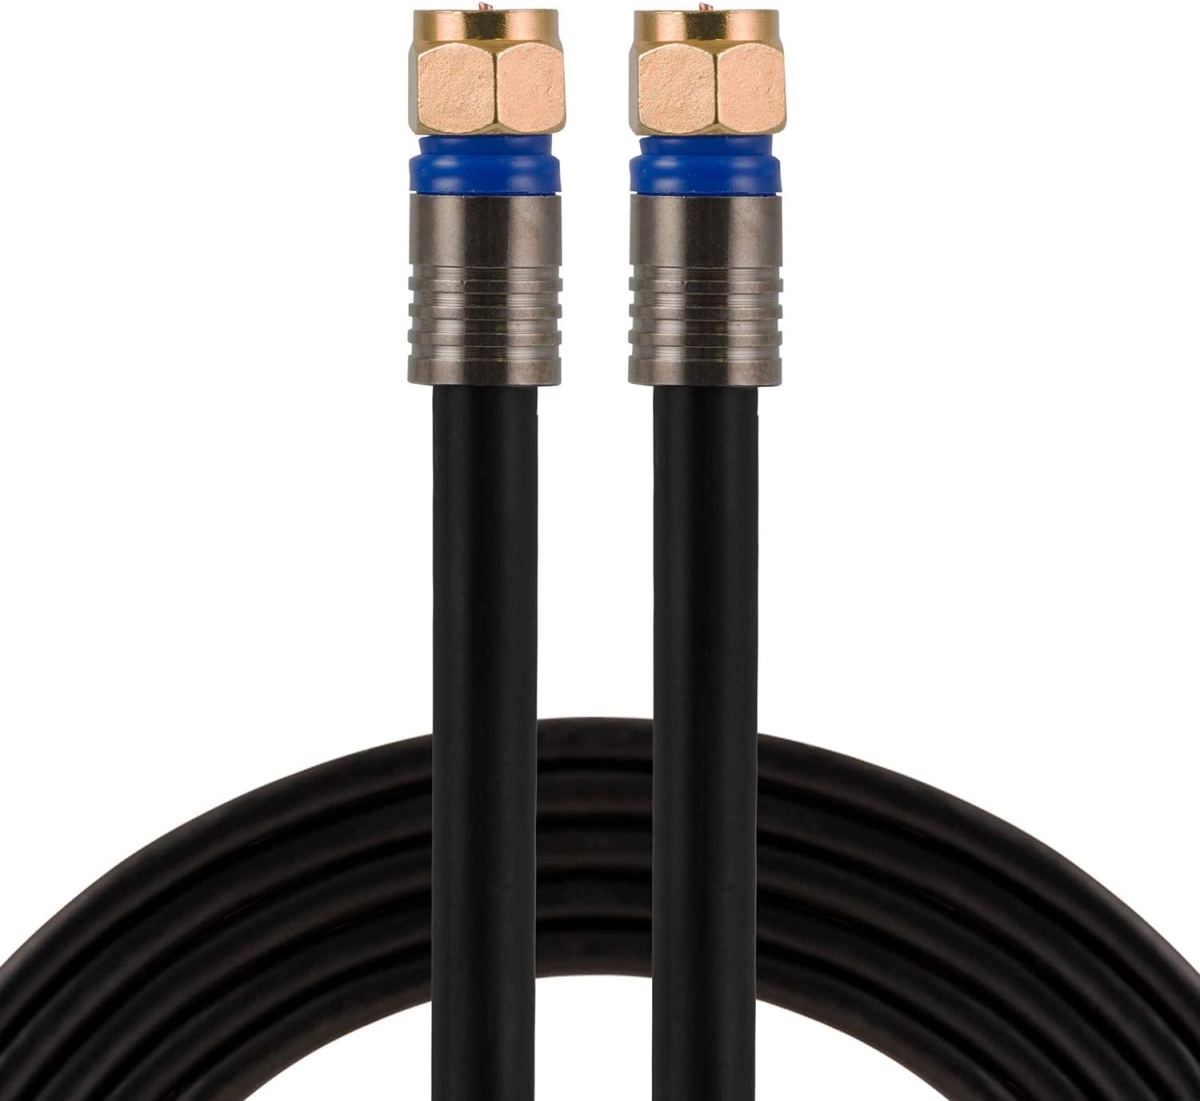 Picture of Miscellaneous GEH33532 RG6 50 ft. Coaxial Cable with F-Type Connectors